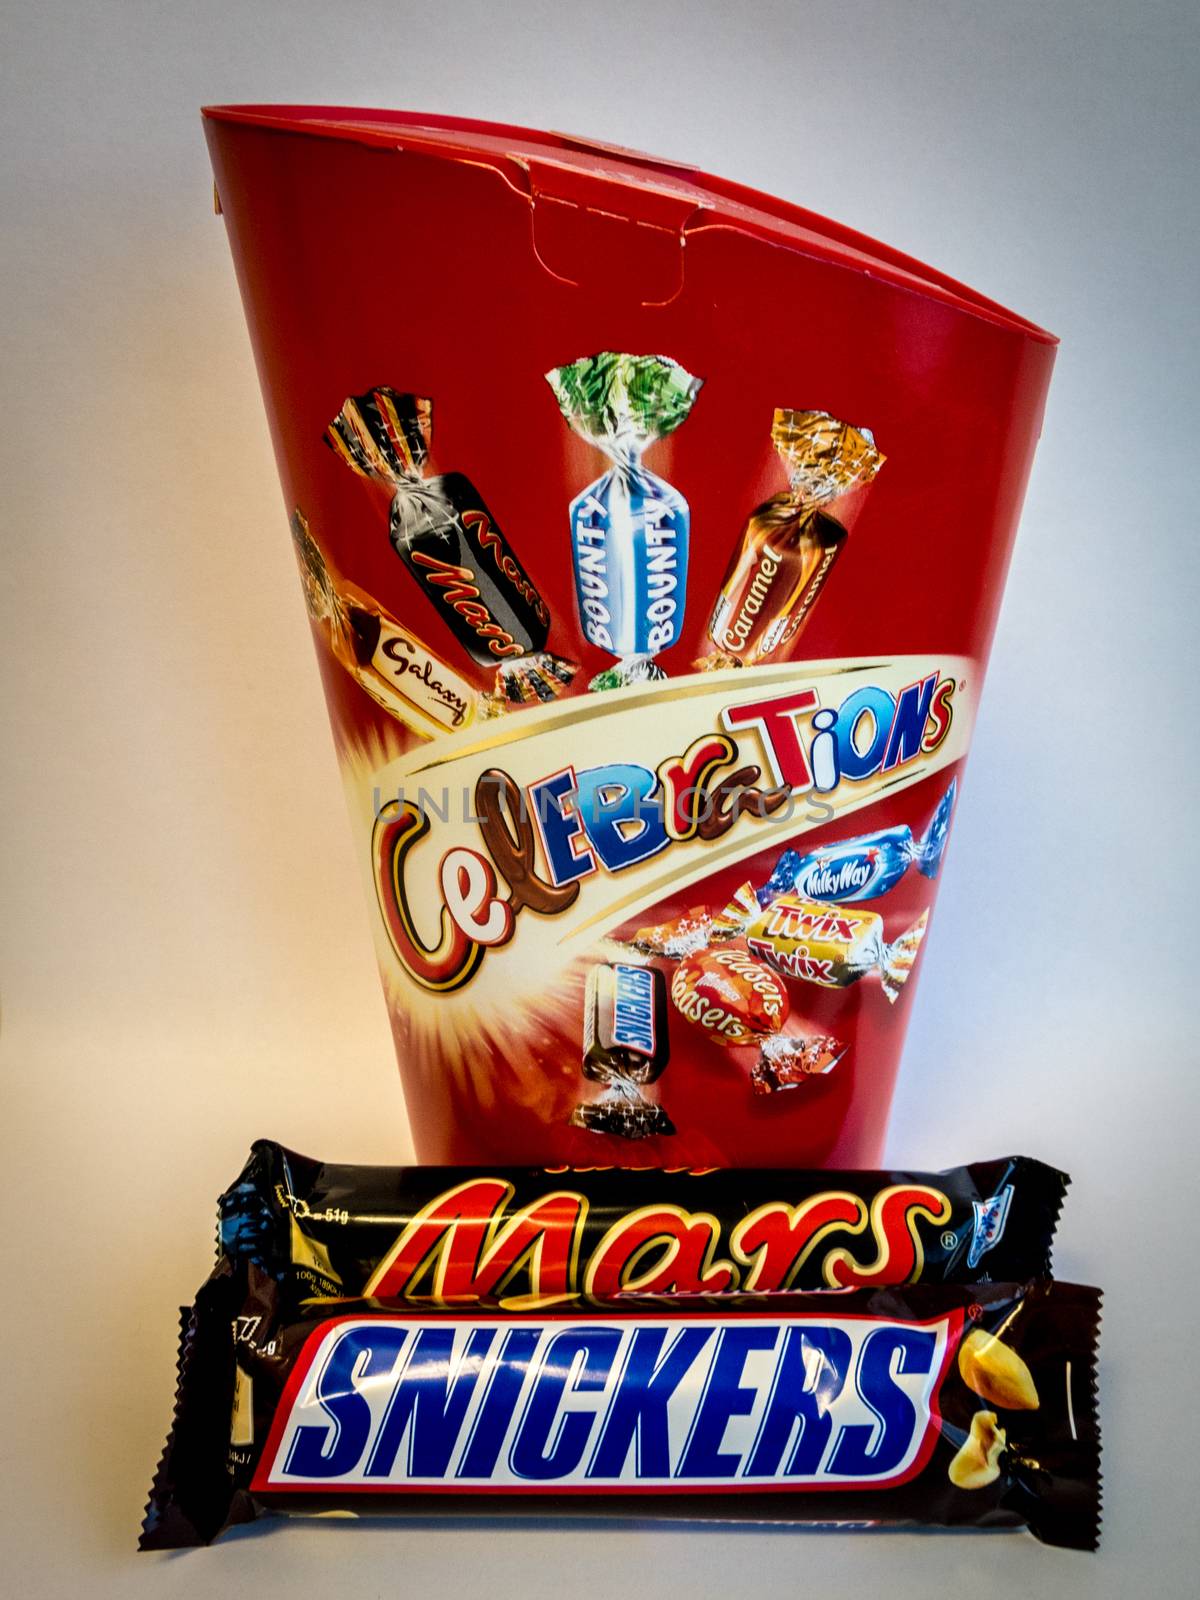 UK, London: A stock photo shows a box of Celebrations a Mars and a Snicker bar after Mars withdrew the popular chocolate confectioneries Mars, Snickers and Celebrations from sale following foreign bodies, believed to plastic, found in the items on February 23, 2016. Mars are investigating the matter. 